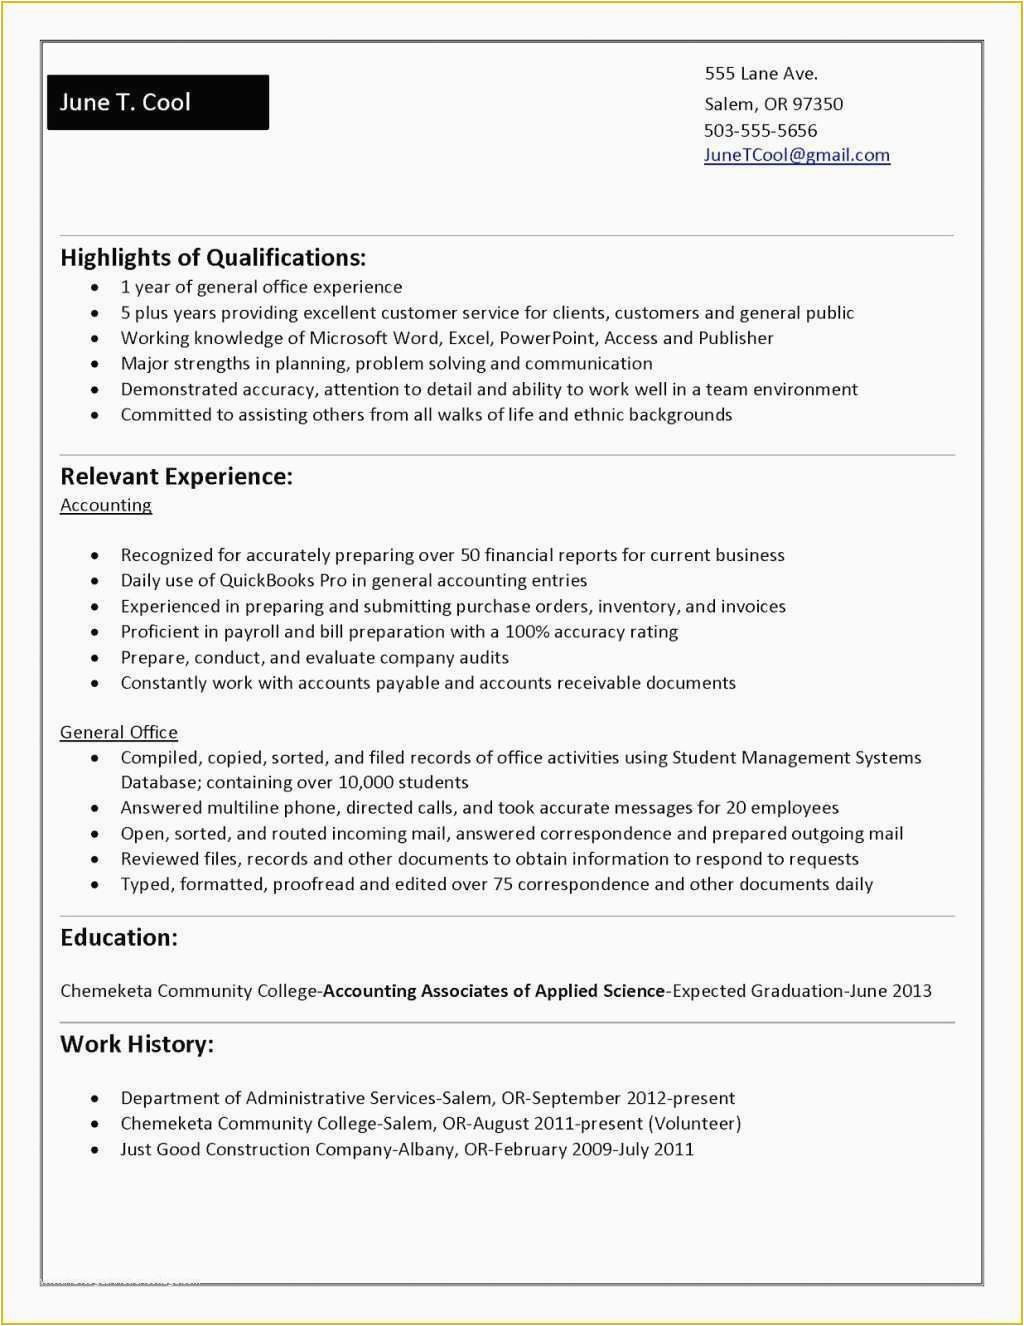 Amazing Resume Samples for someone with No Eperience Free Resume Templates for No Work Experience No Work Experience